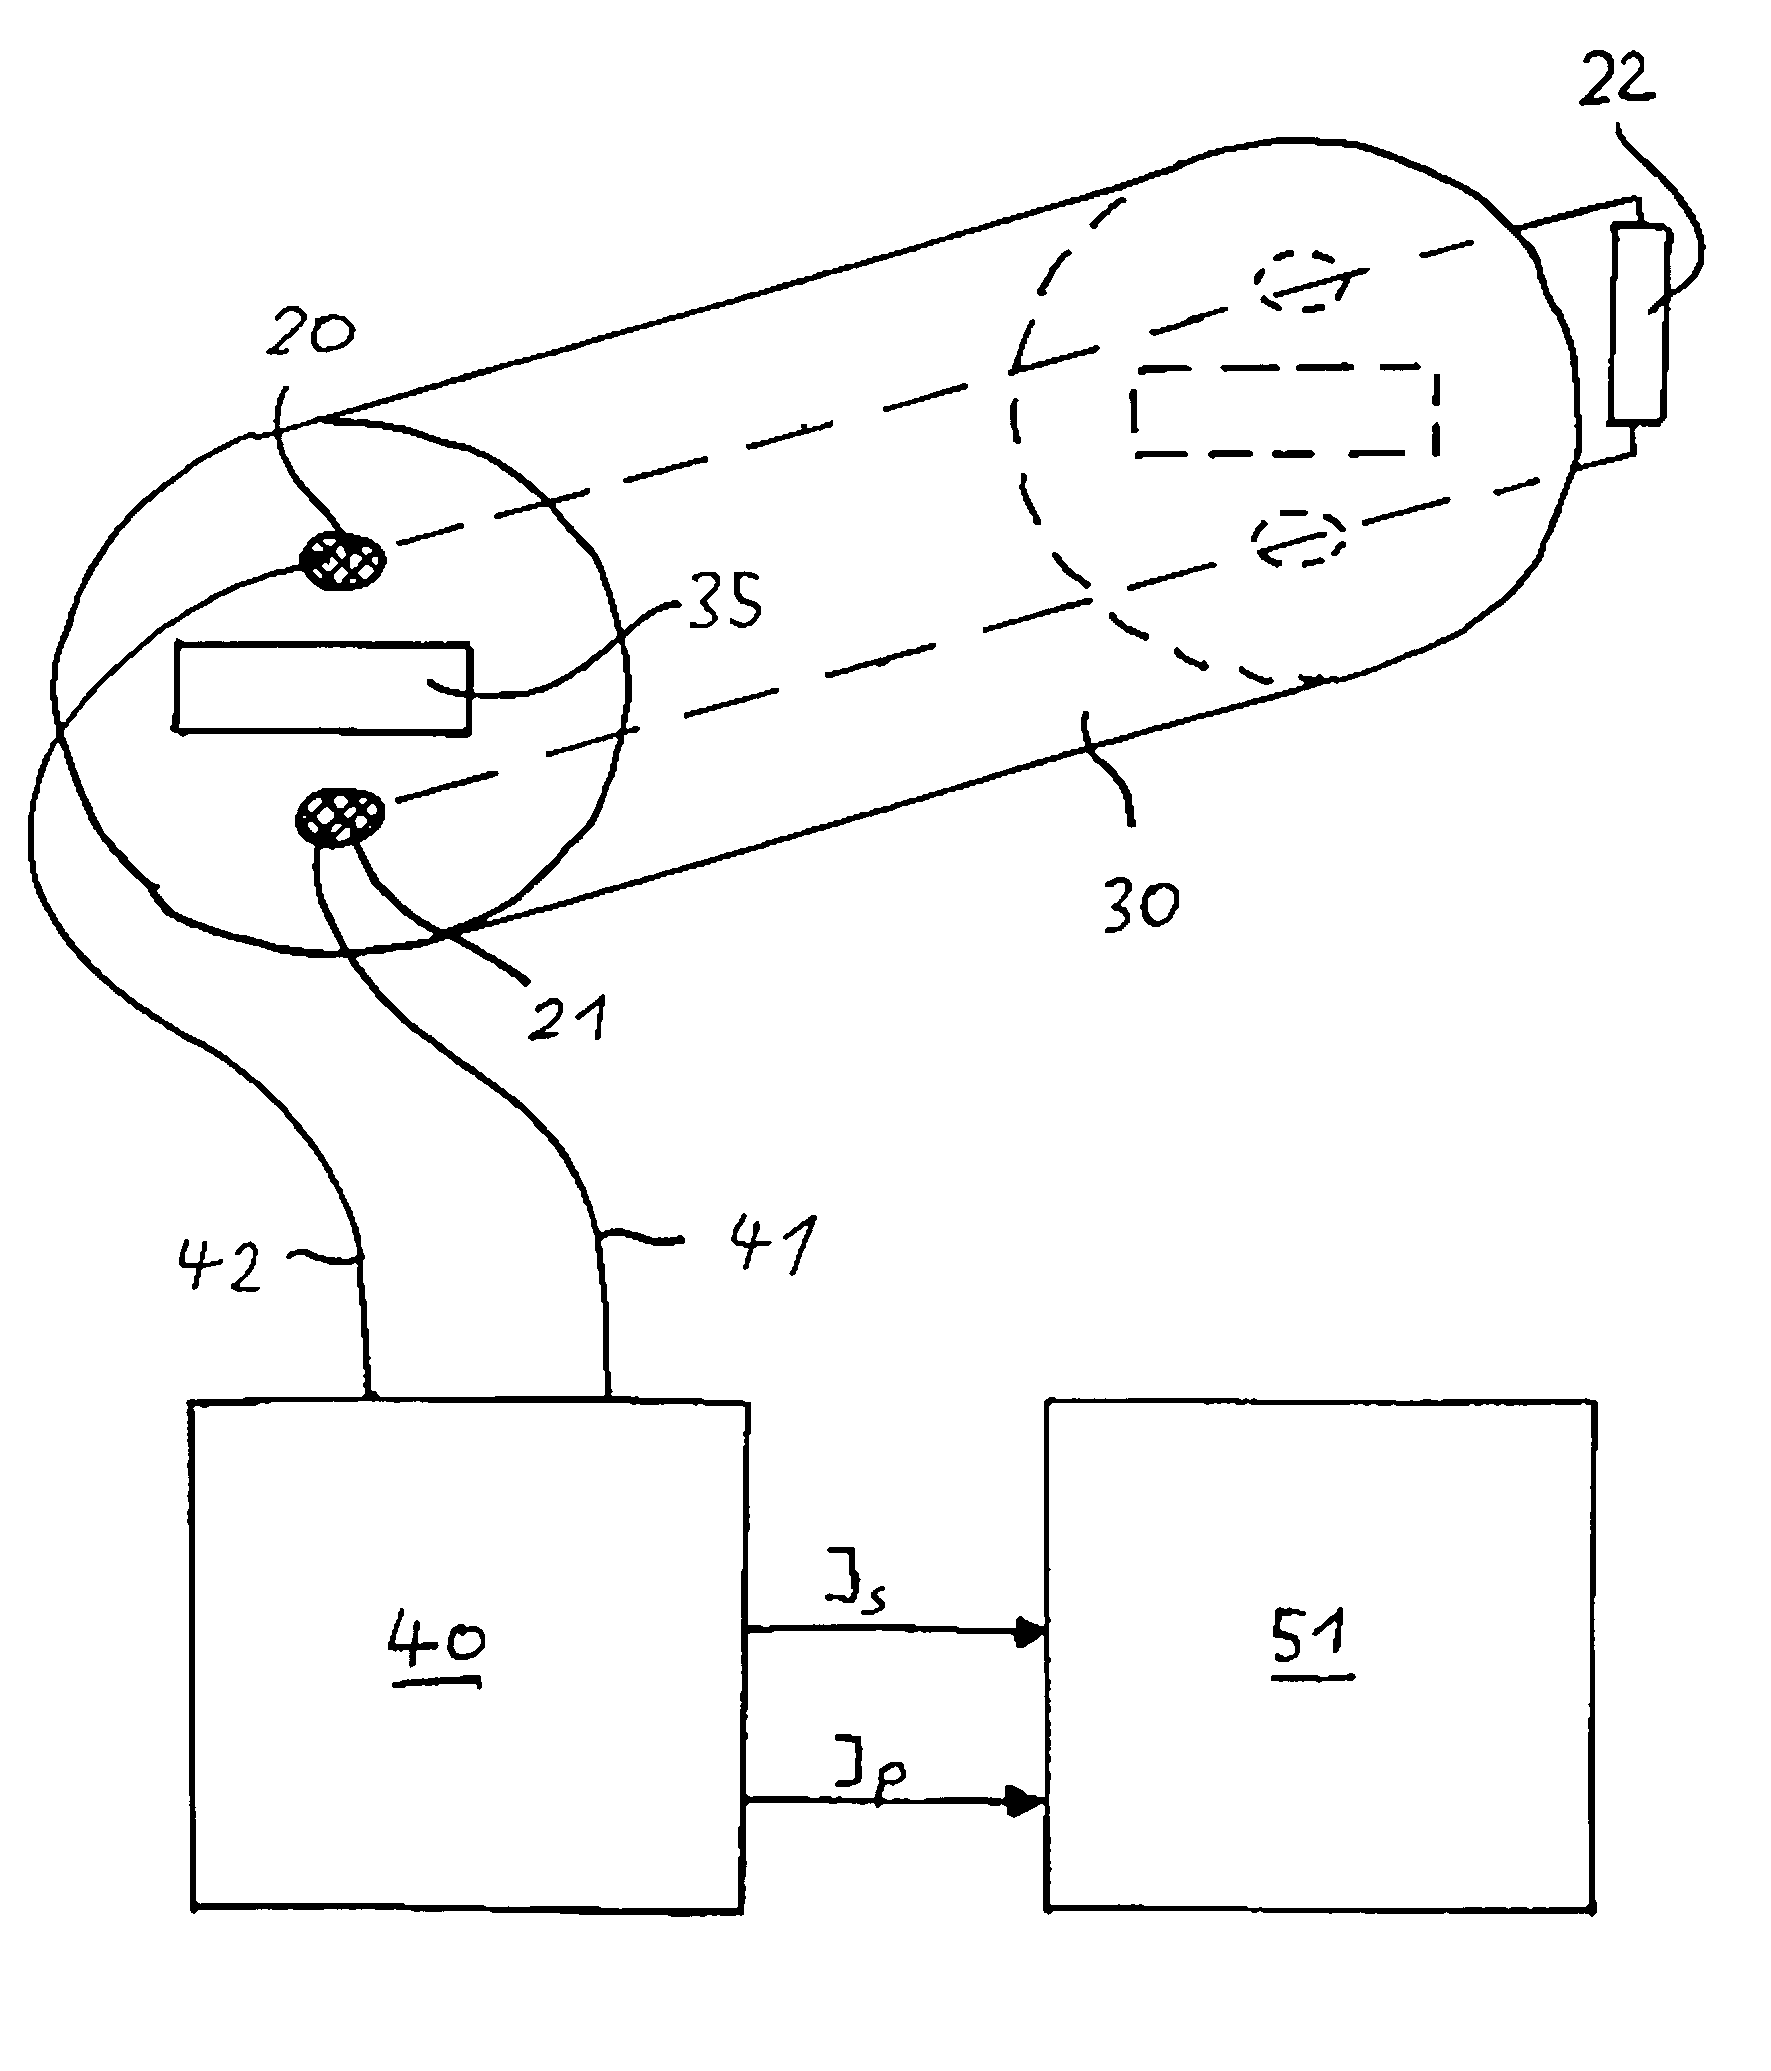 Device for detecting an obstacle in the opening range of a movable closure element